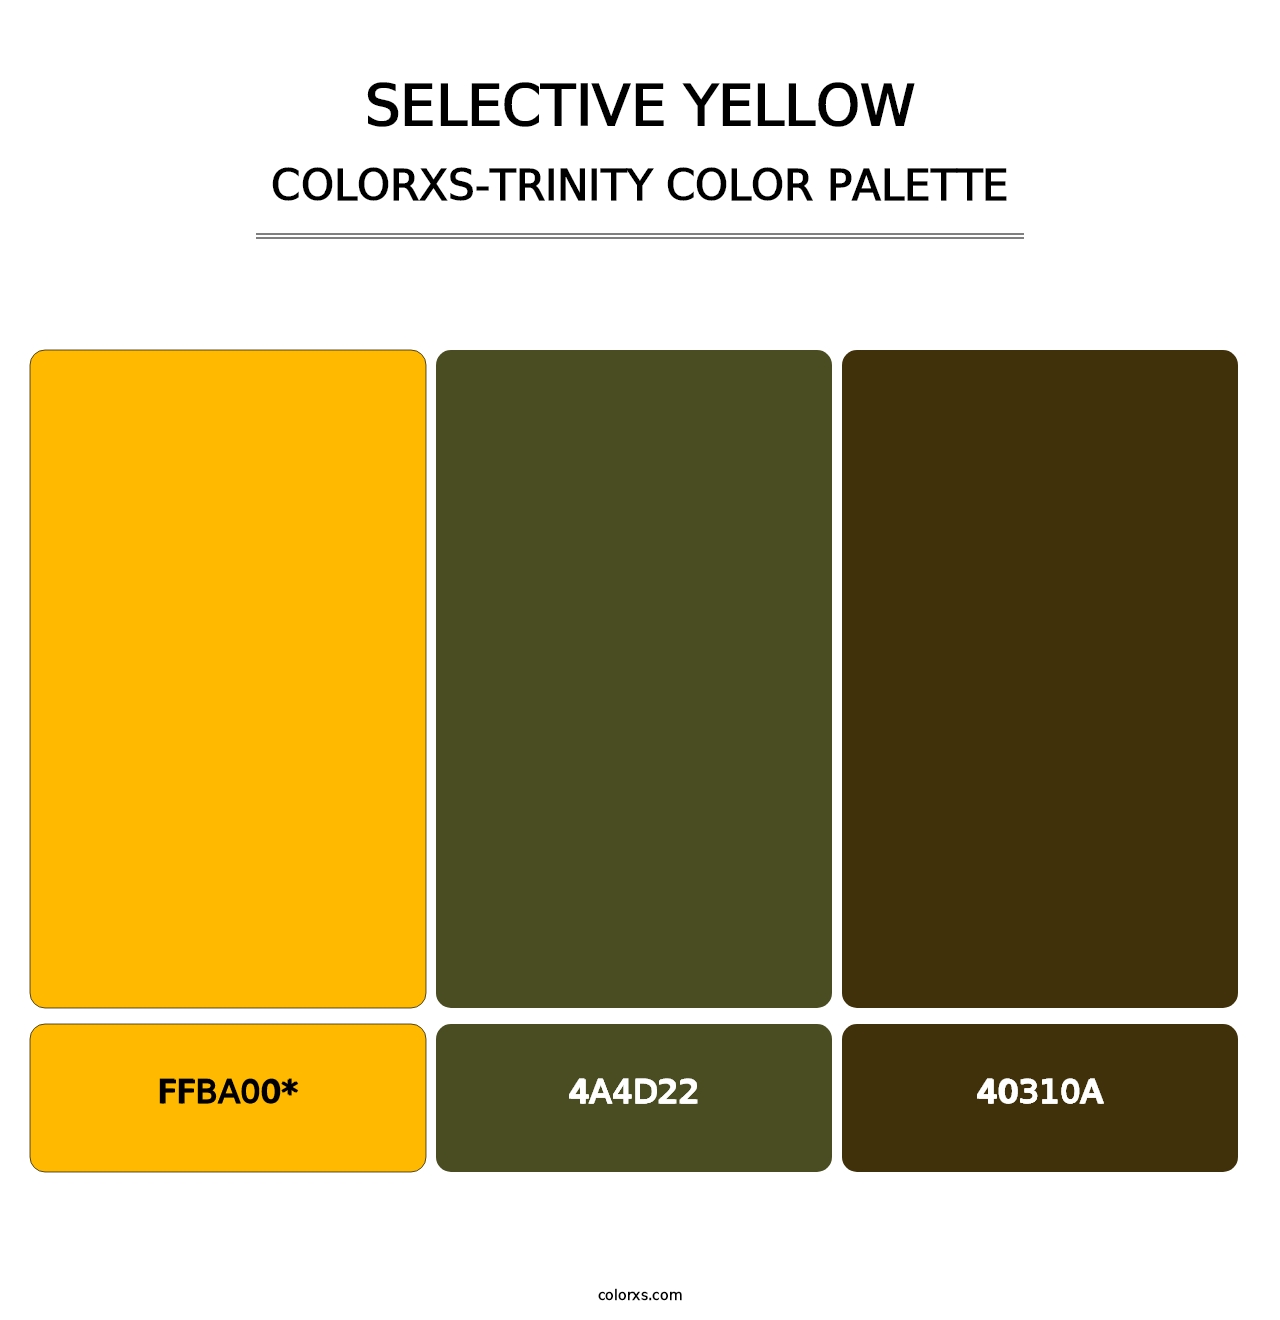 Selective yellow - Colorxs Trinity Palette